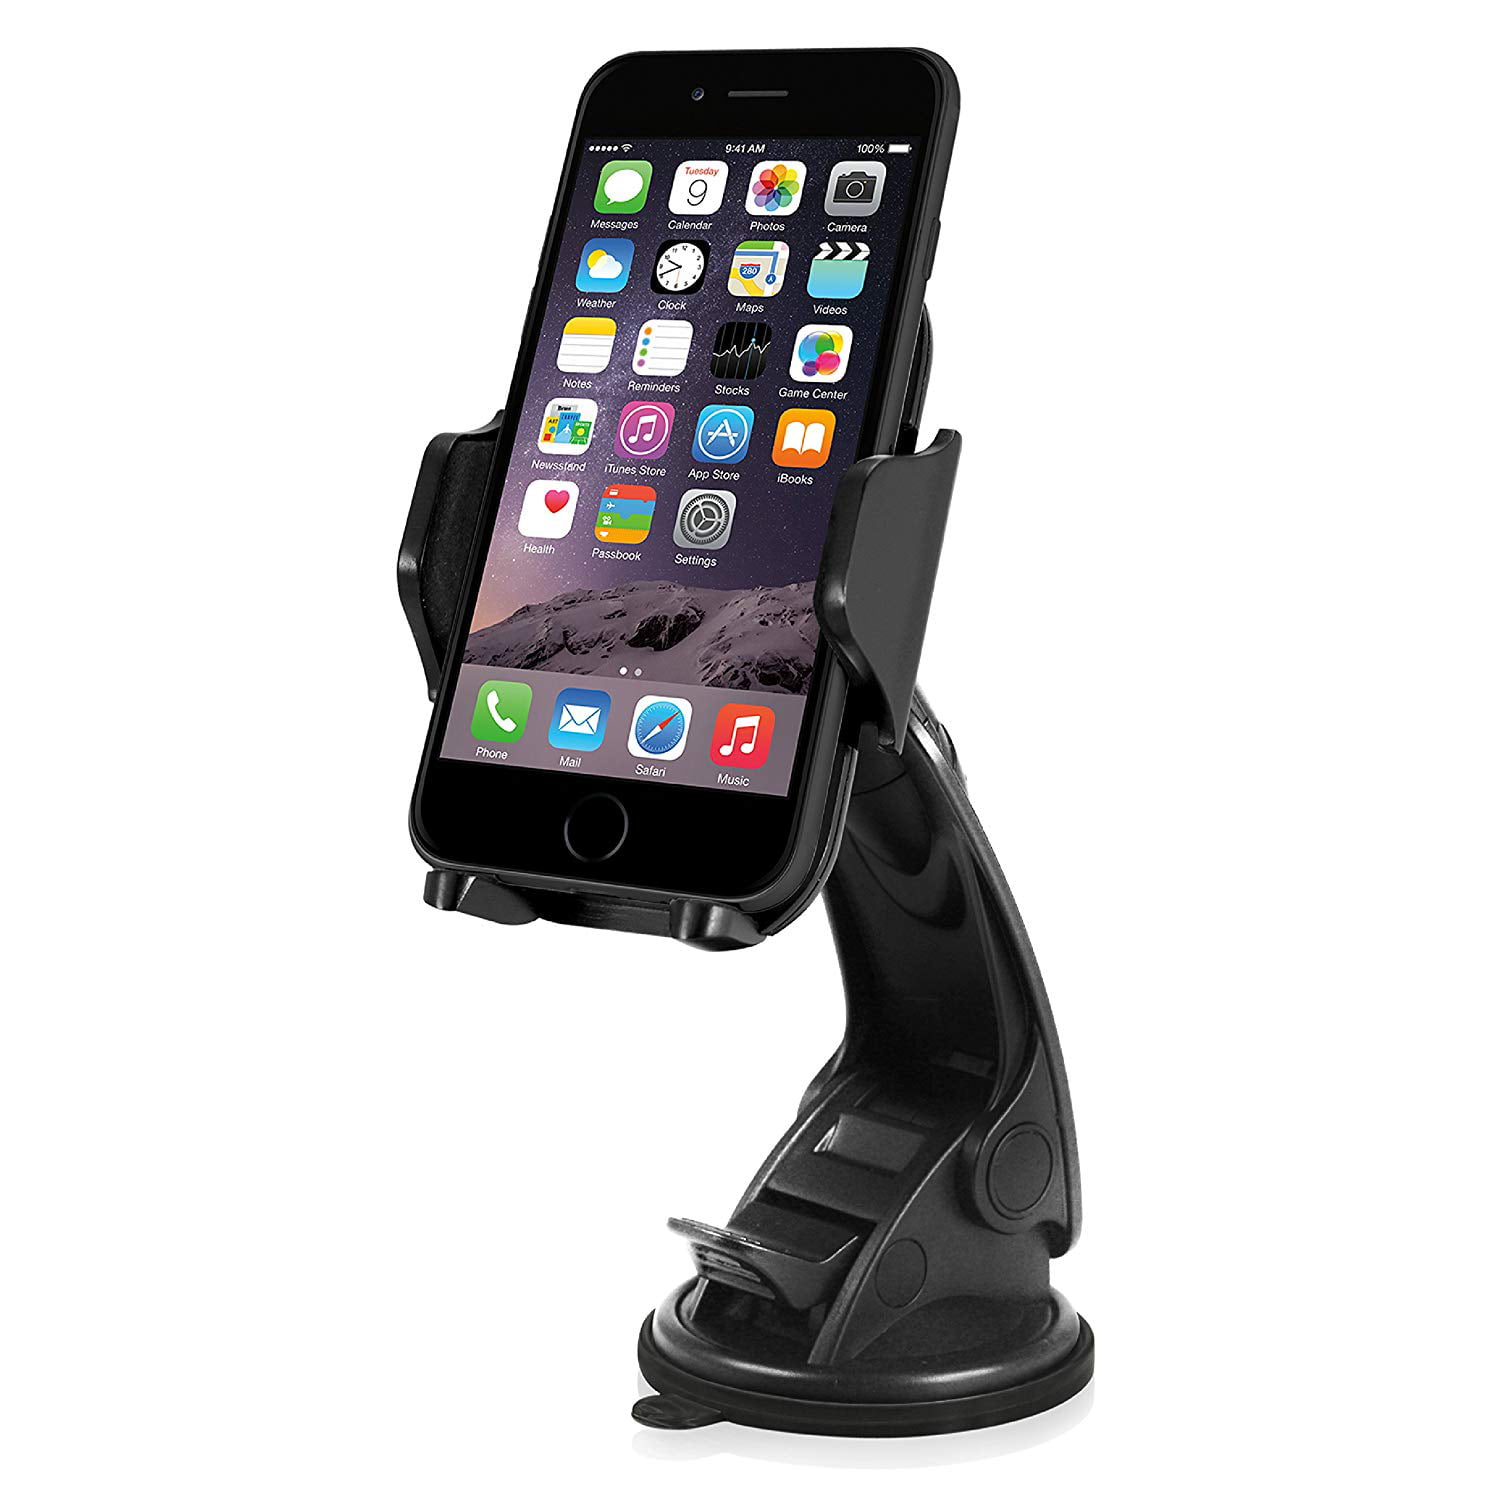 Windshield Phone Mount, Adjustable Suction Cup Window Mount Phone ...